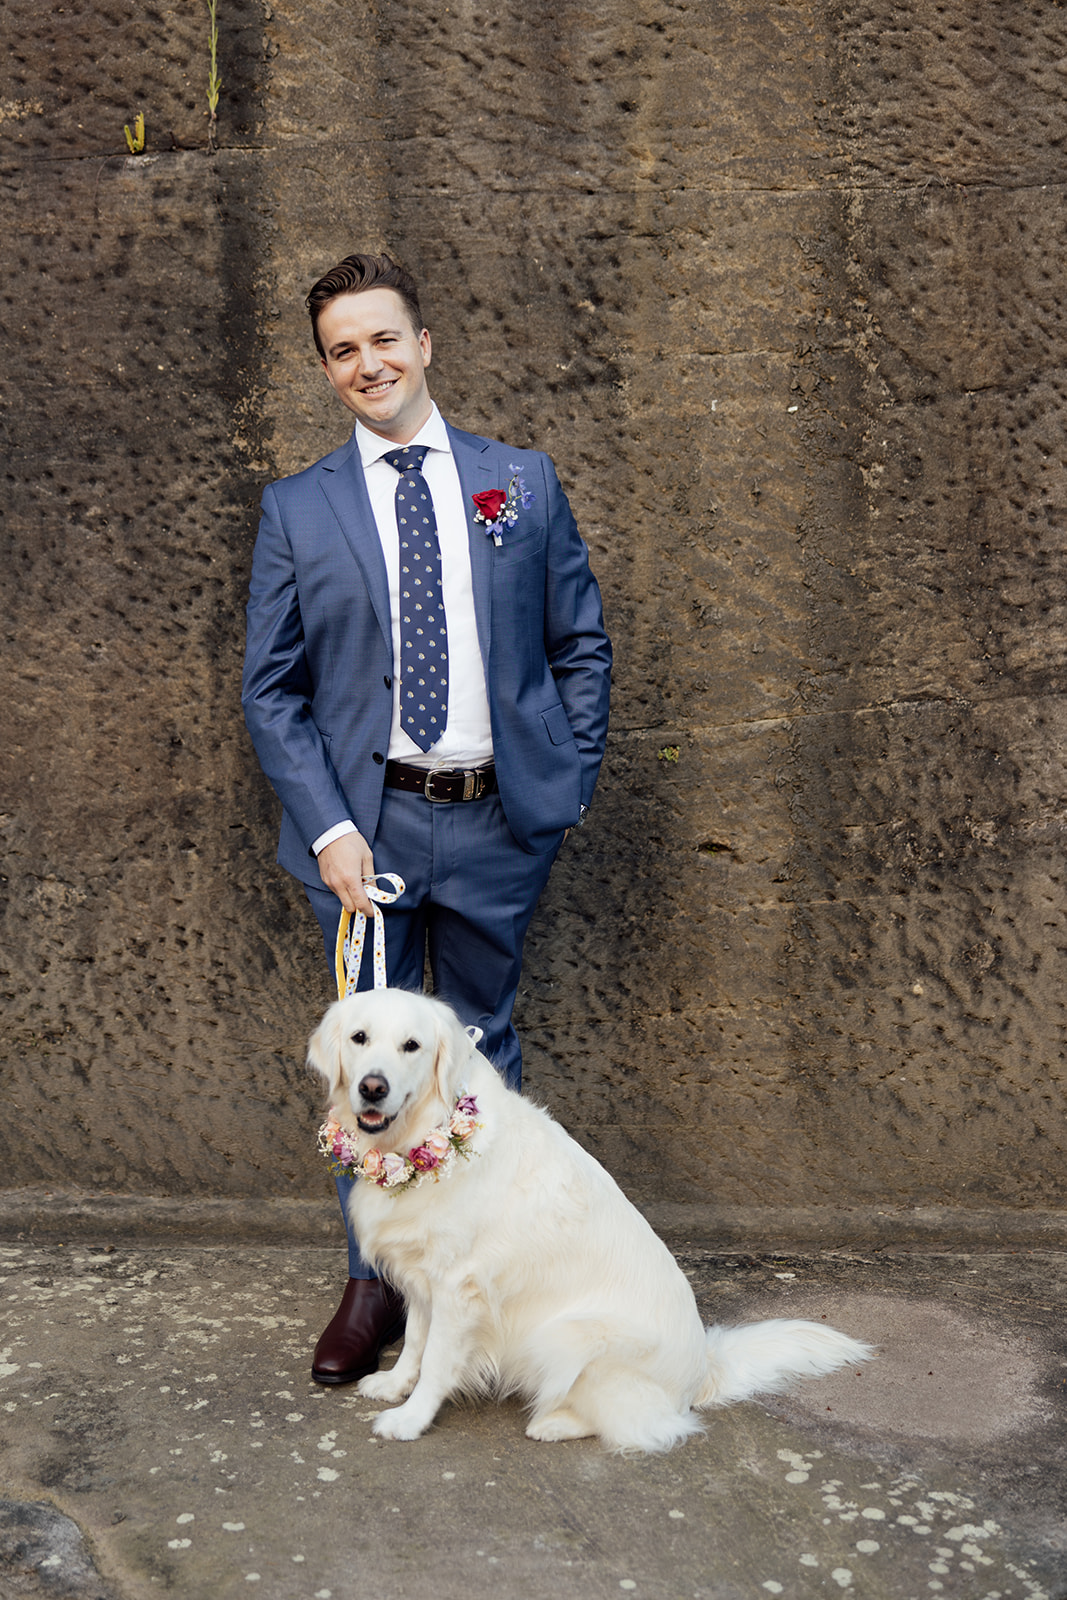 A man in a suit with a golden retriever dog